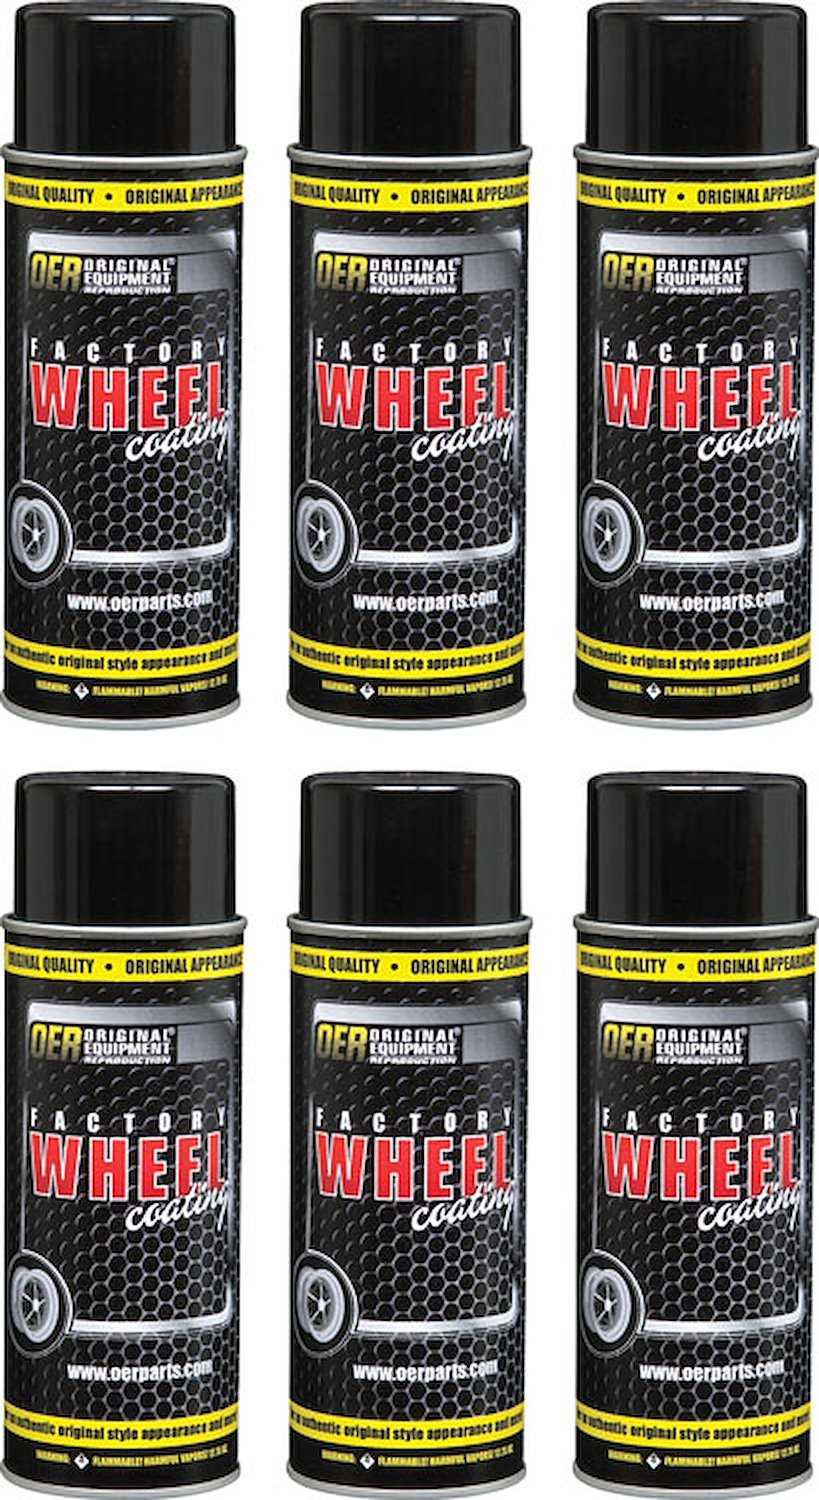 K89336 Wheel Paint California Gold OER "Factory Wheel Coating" Case Of 6-16 Oz Cans